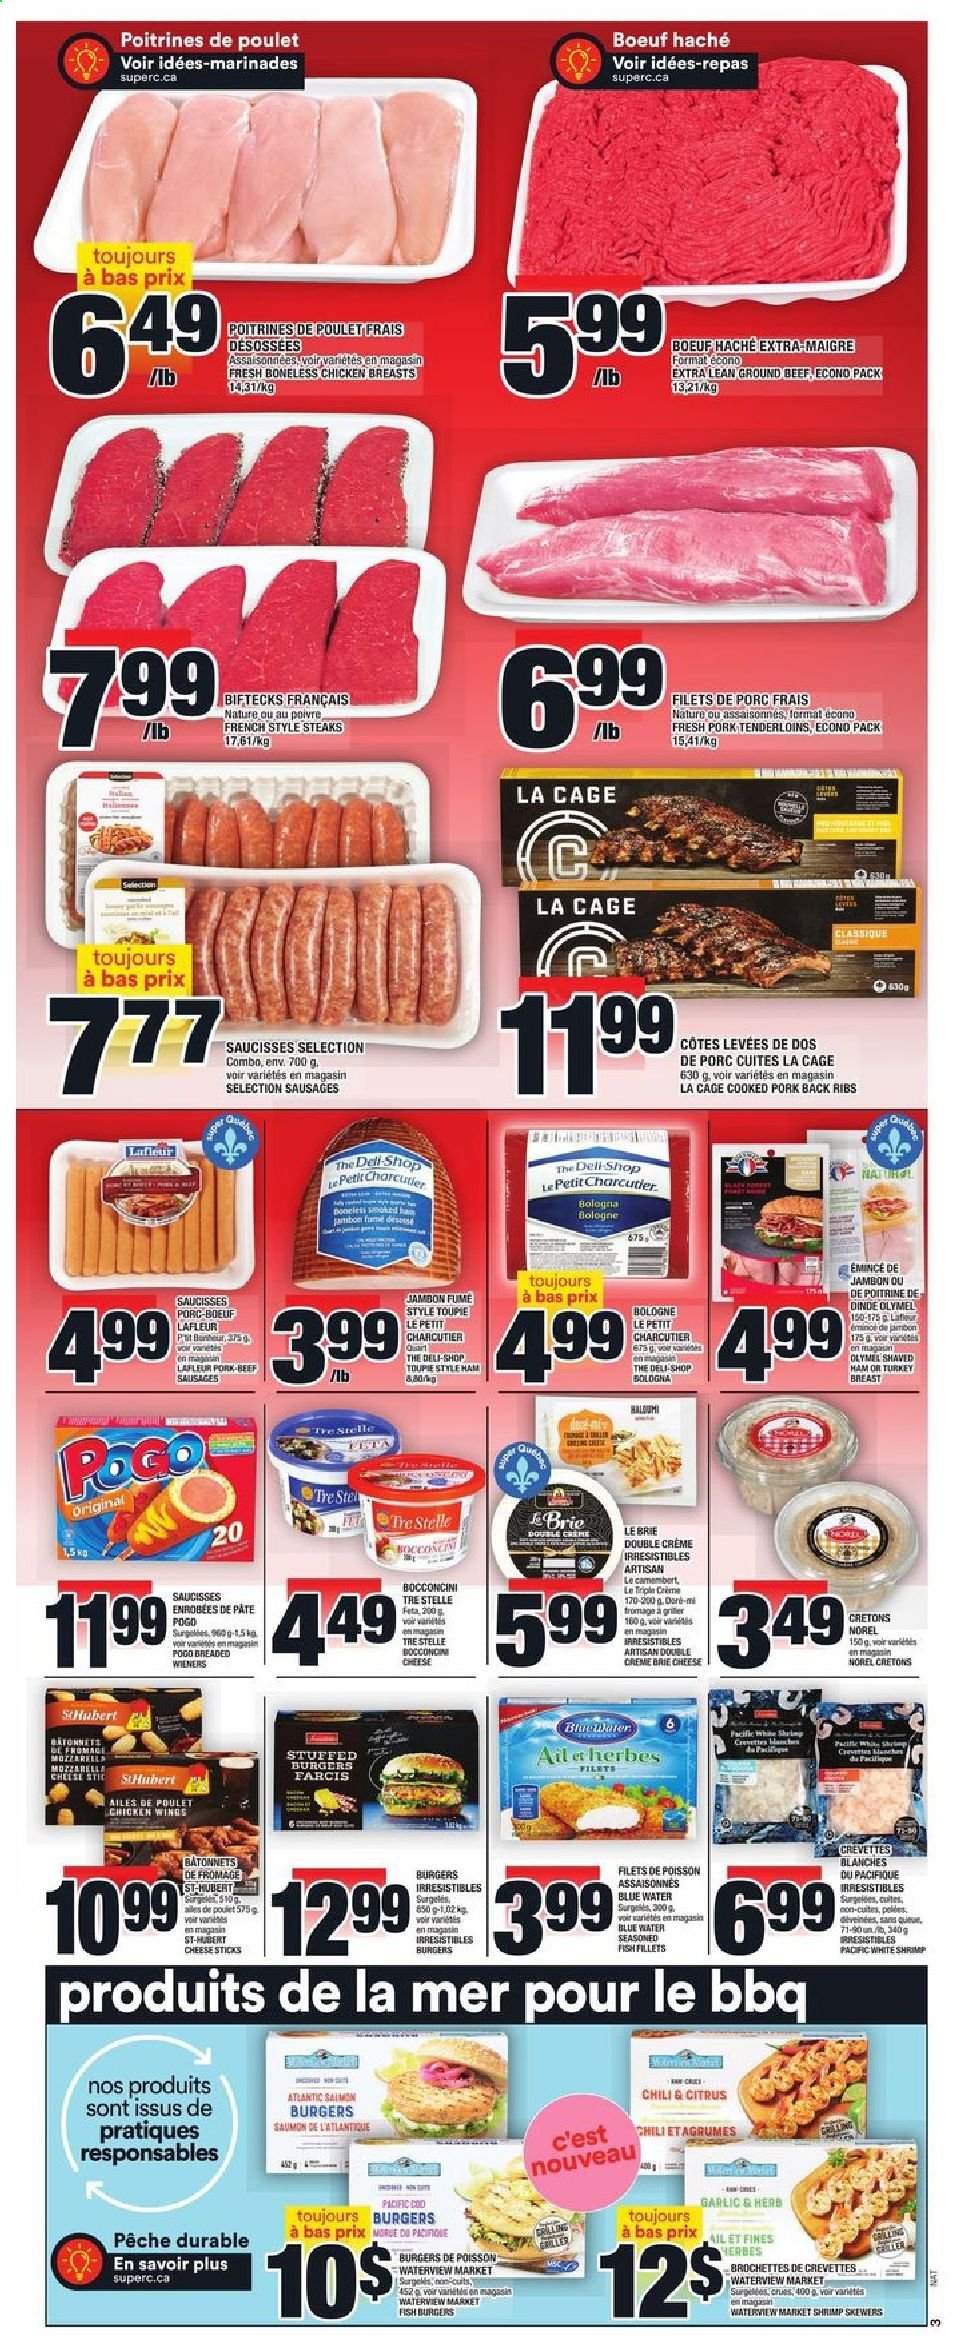 thumbnail - Super C Flyer - July 22, 2021 - July 28, 2021 - Sales products - fish fillets, fish, shrimps, hamburger, ham, bologna sausage, sausage, beef sausage, bocconcini, cheese, brie, feta, chicken wings, cheese sticks, Ron Pelicano, turkey breast, chicken breasts, turkey, beef meat, ground beef, pork tenderloin, steak. Page 4.